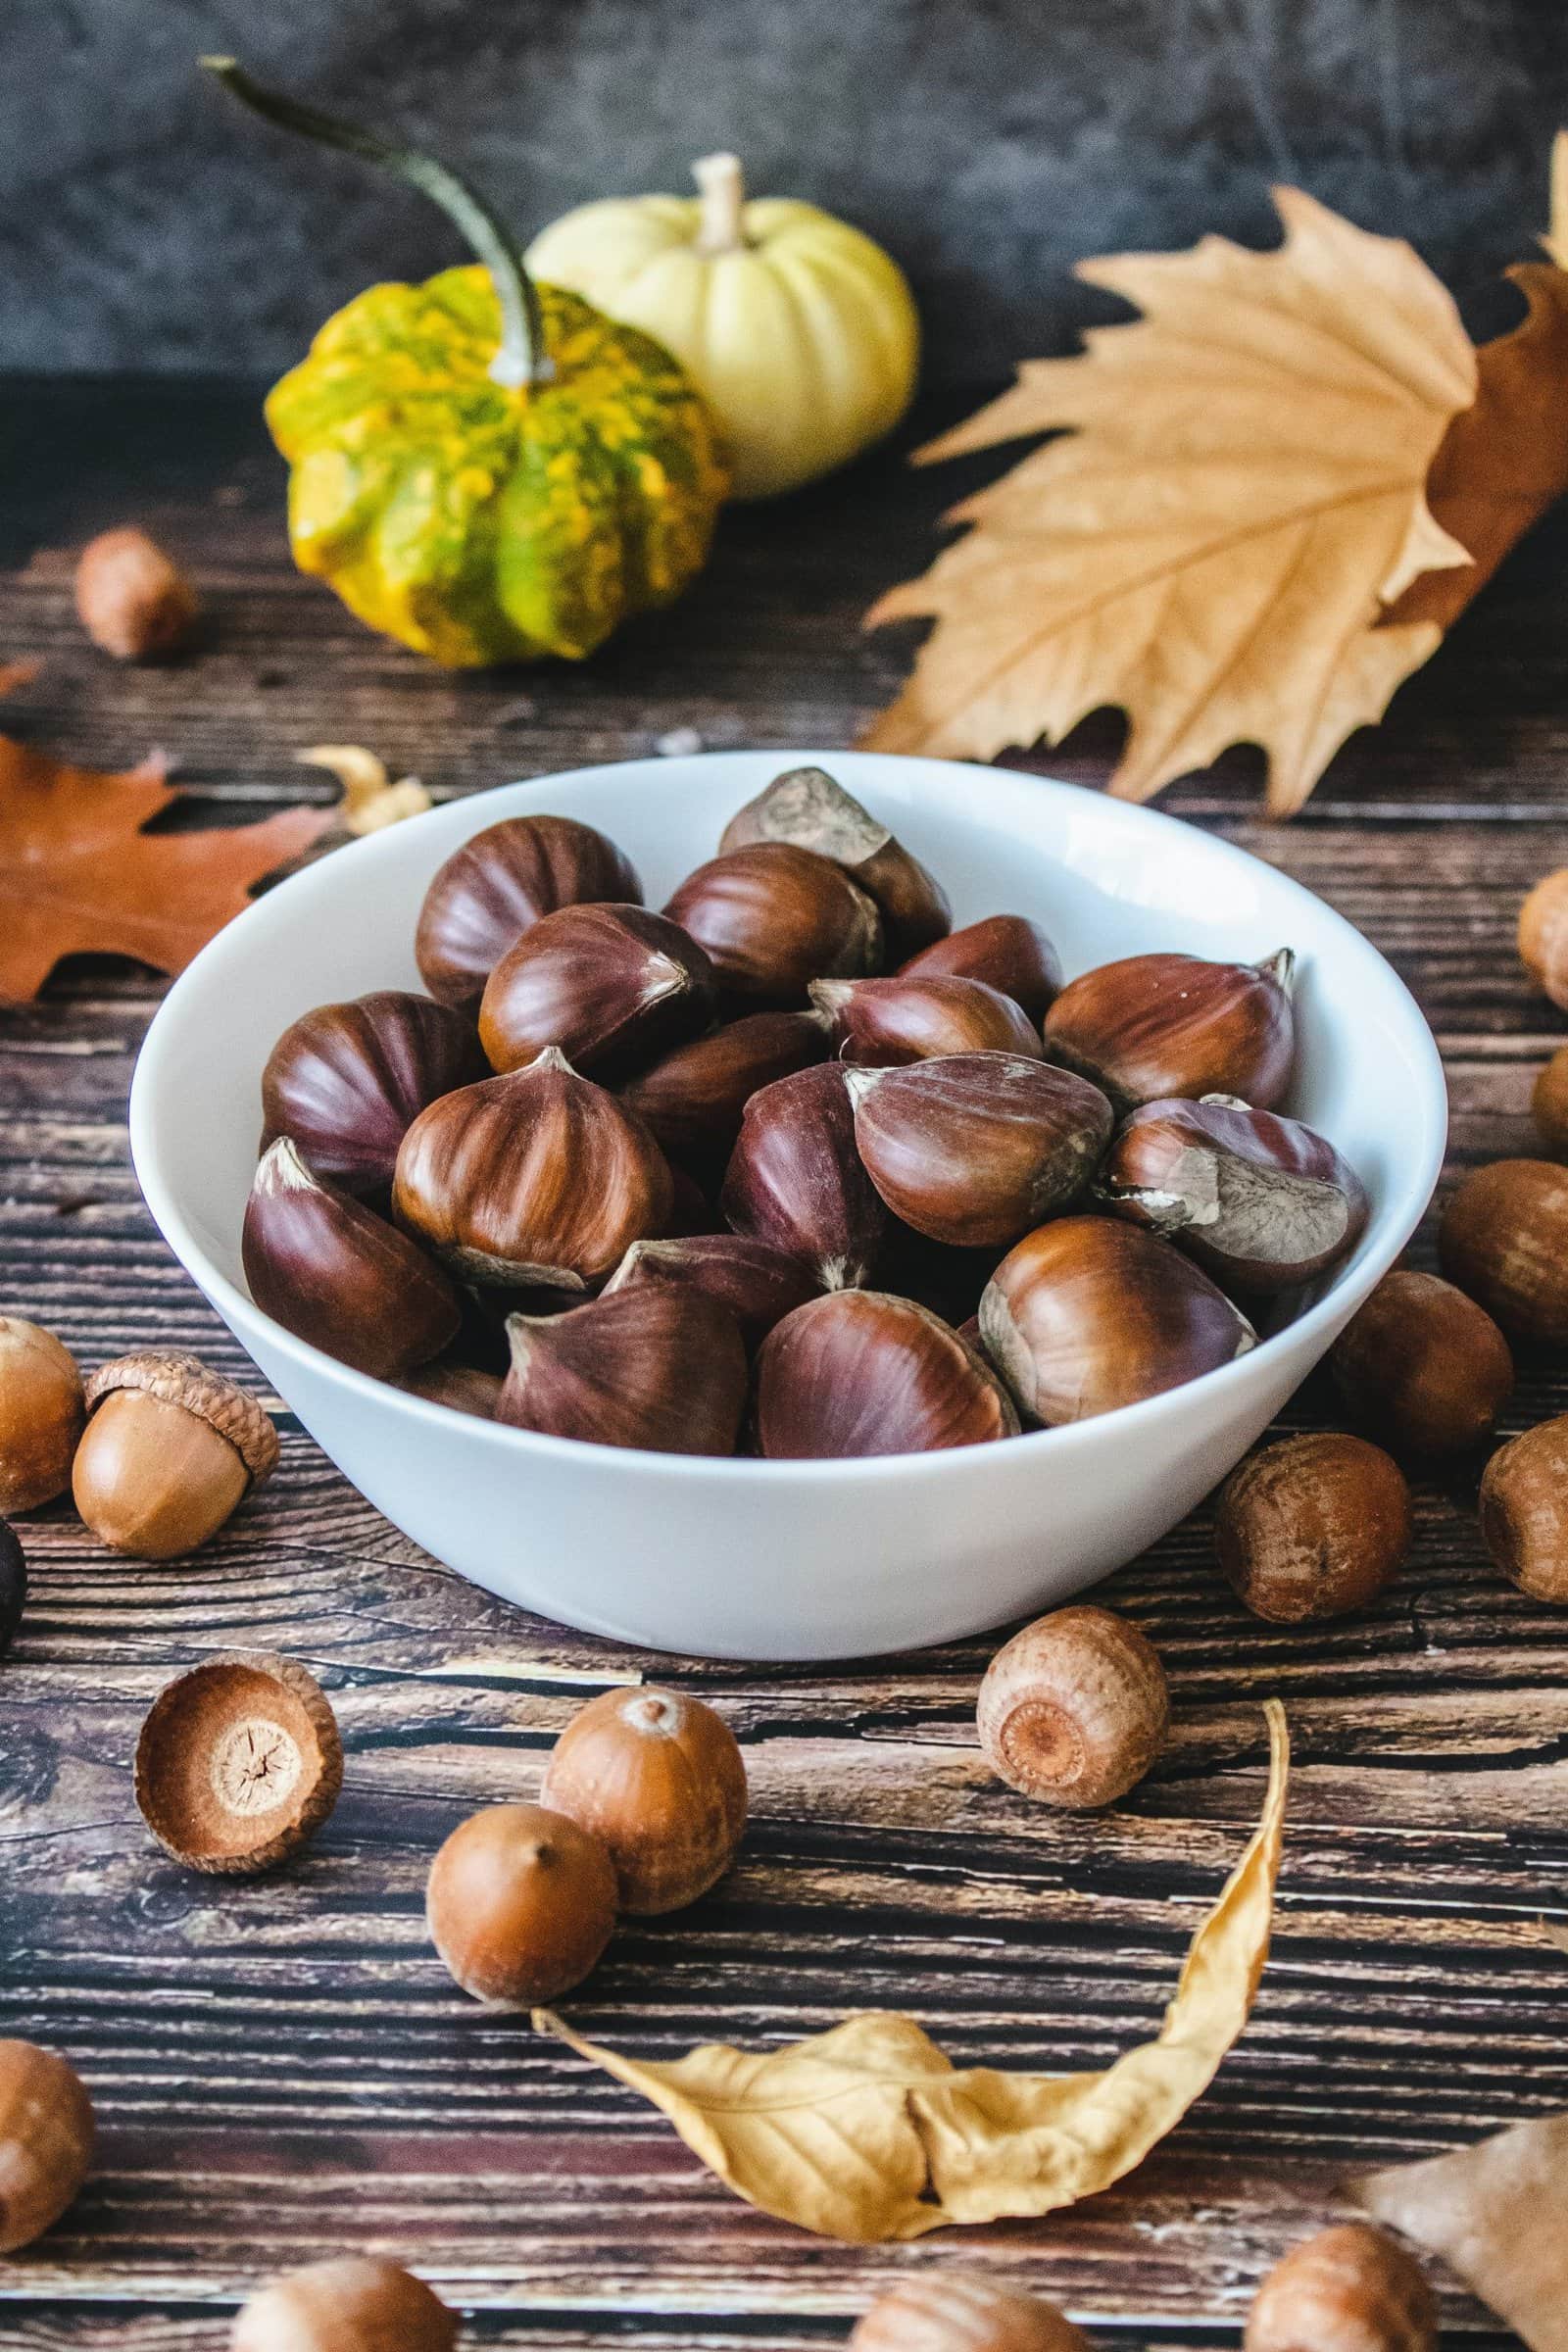  Chestnuts Are Another Food That Works as Decor scaled